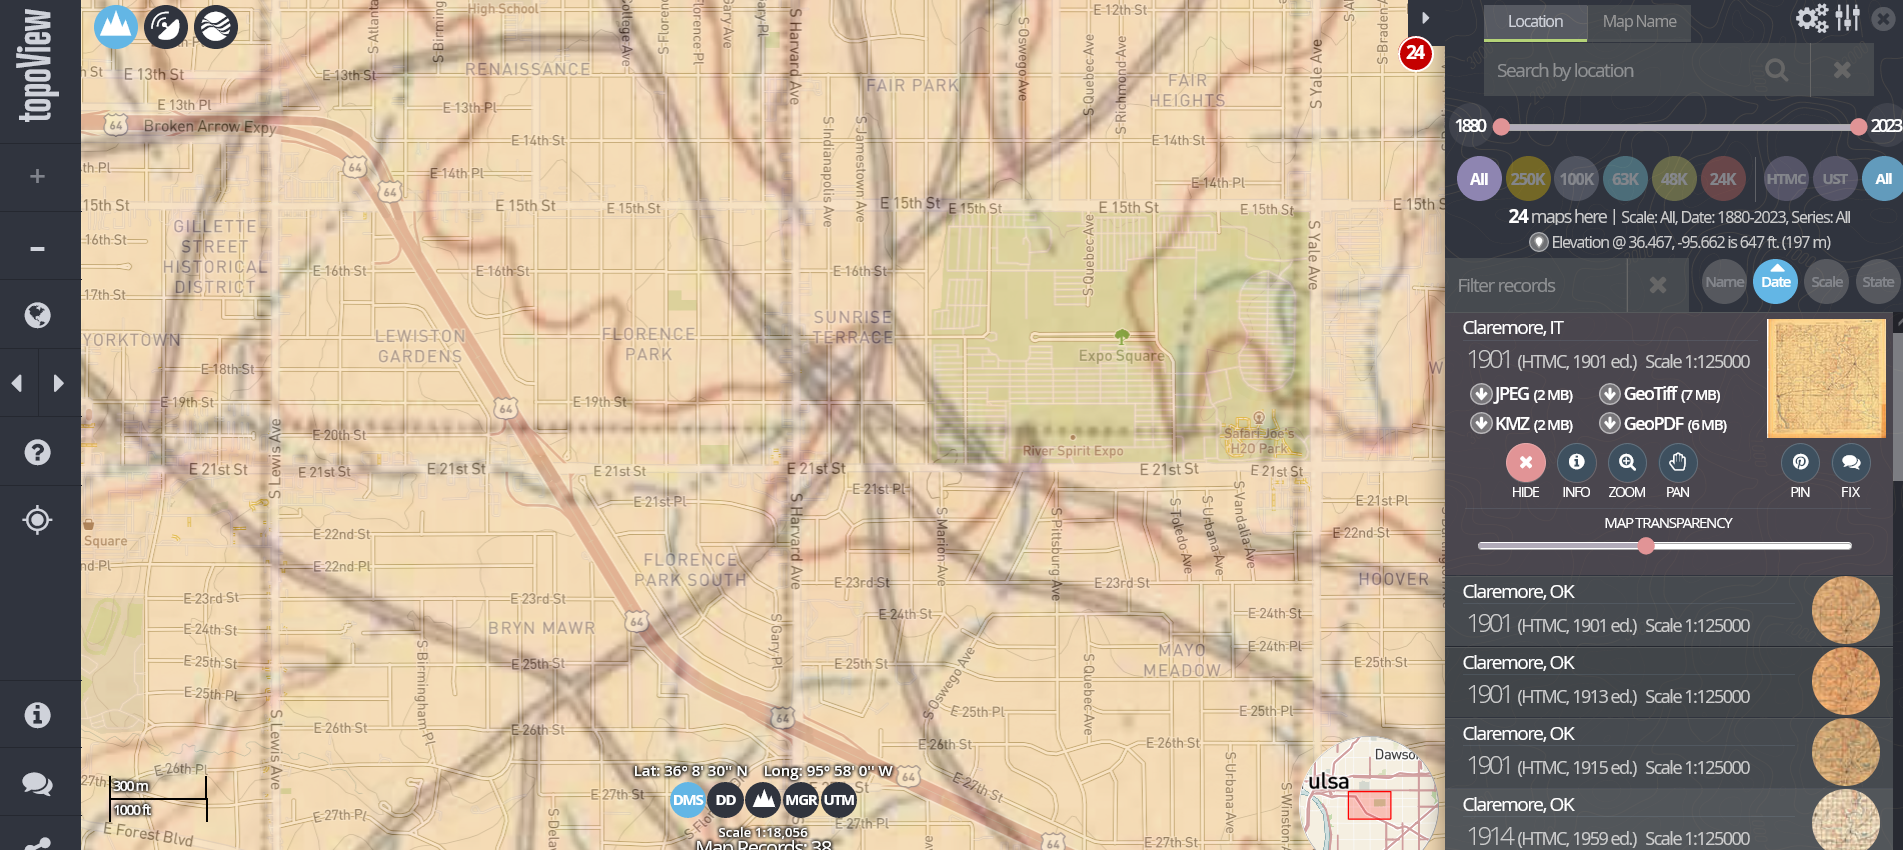 USGS Topoview screenshot showing 1901 map around present day Tulsa State Fairgrounds (Expo Square) overlaid on the modern street grid